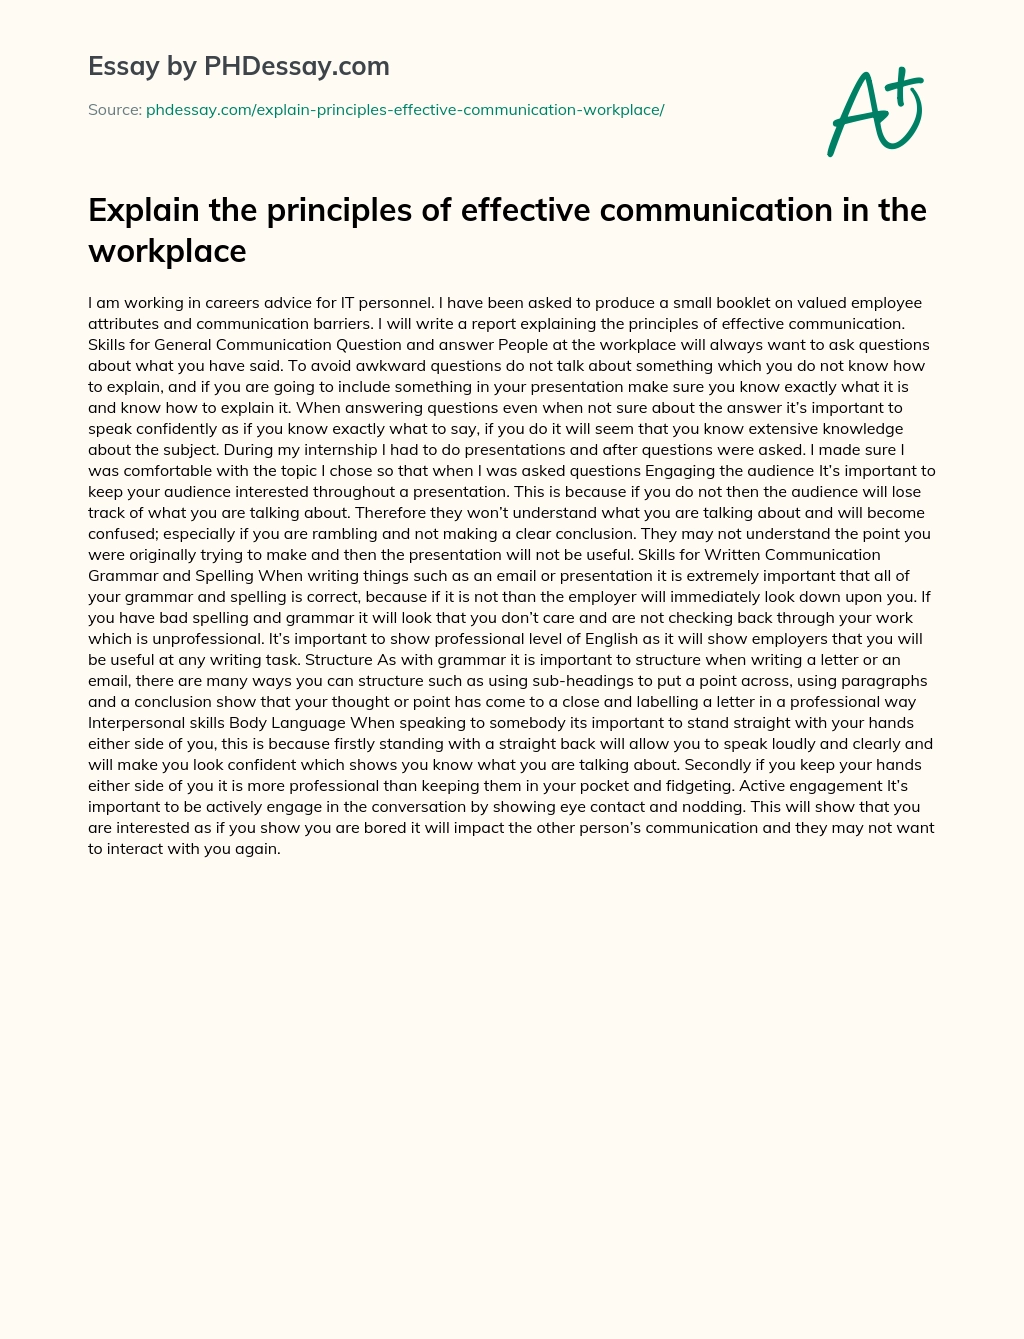 Explain the principles of effective communication in the workplace essay